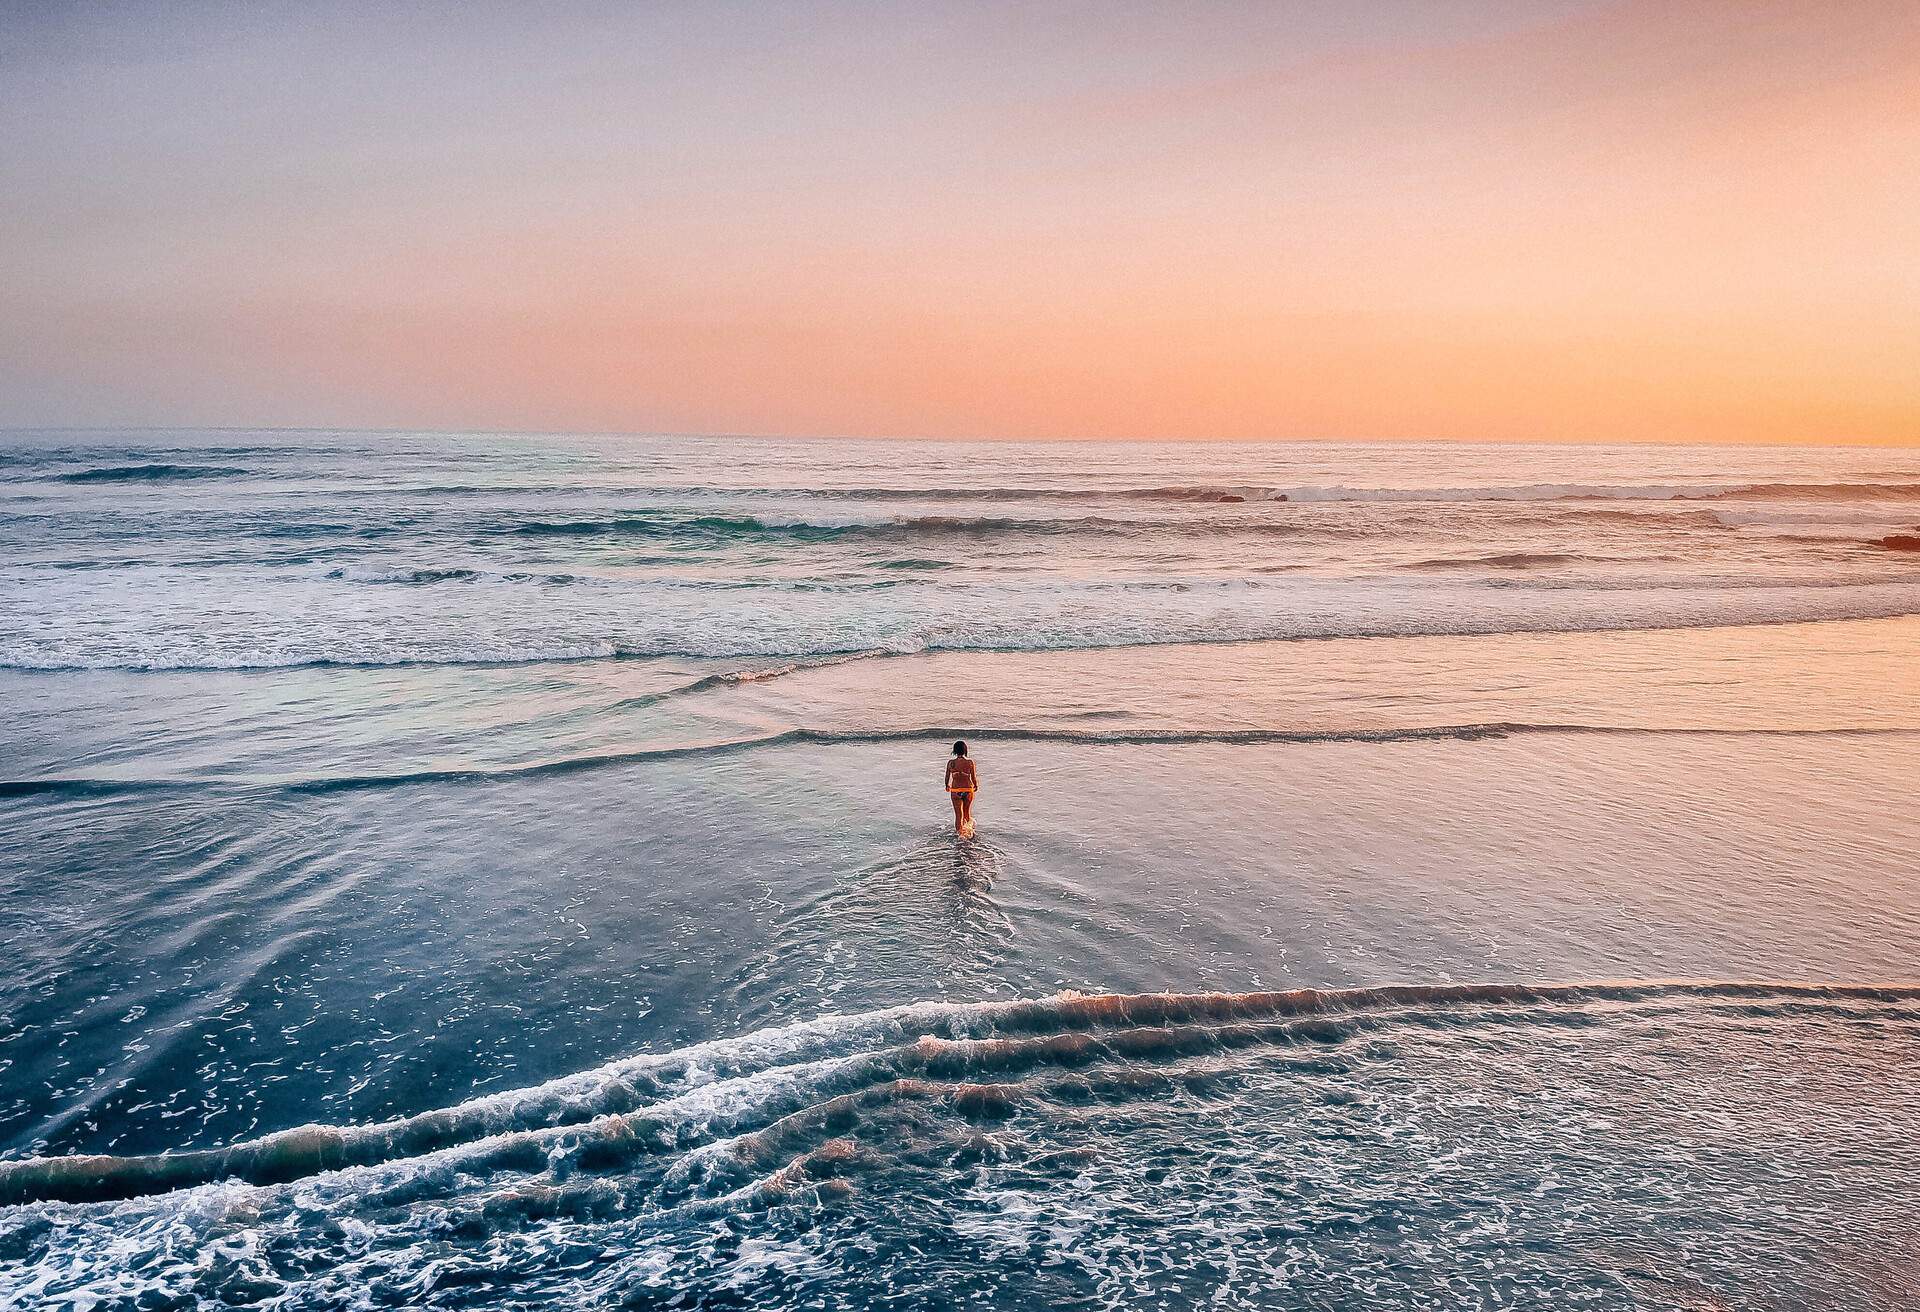 A person stands on a beach with calm waves under an orange sky.